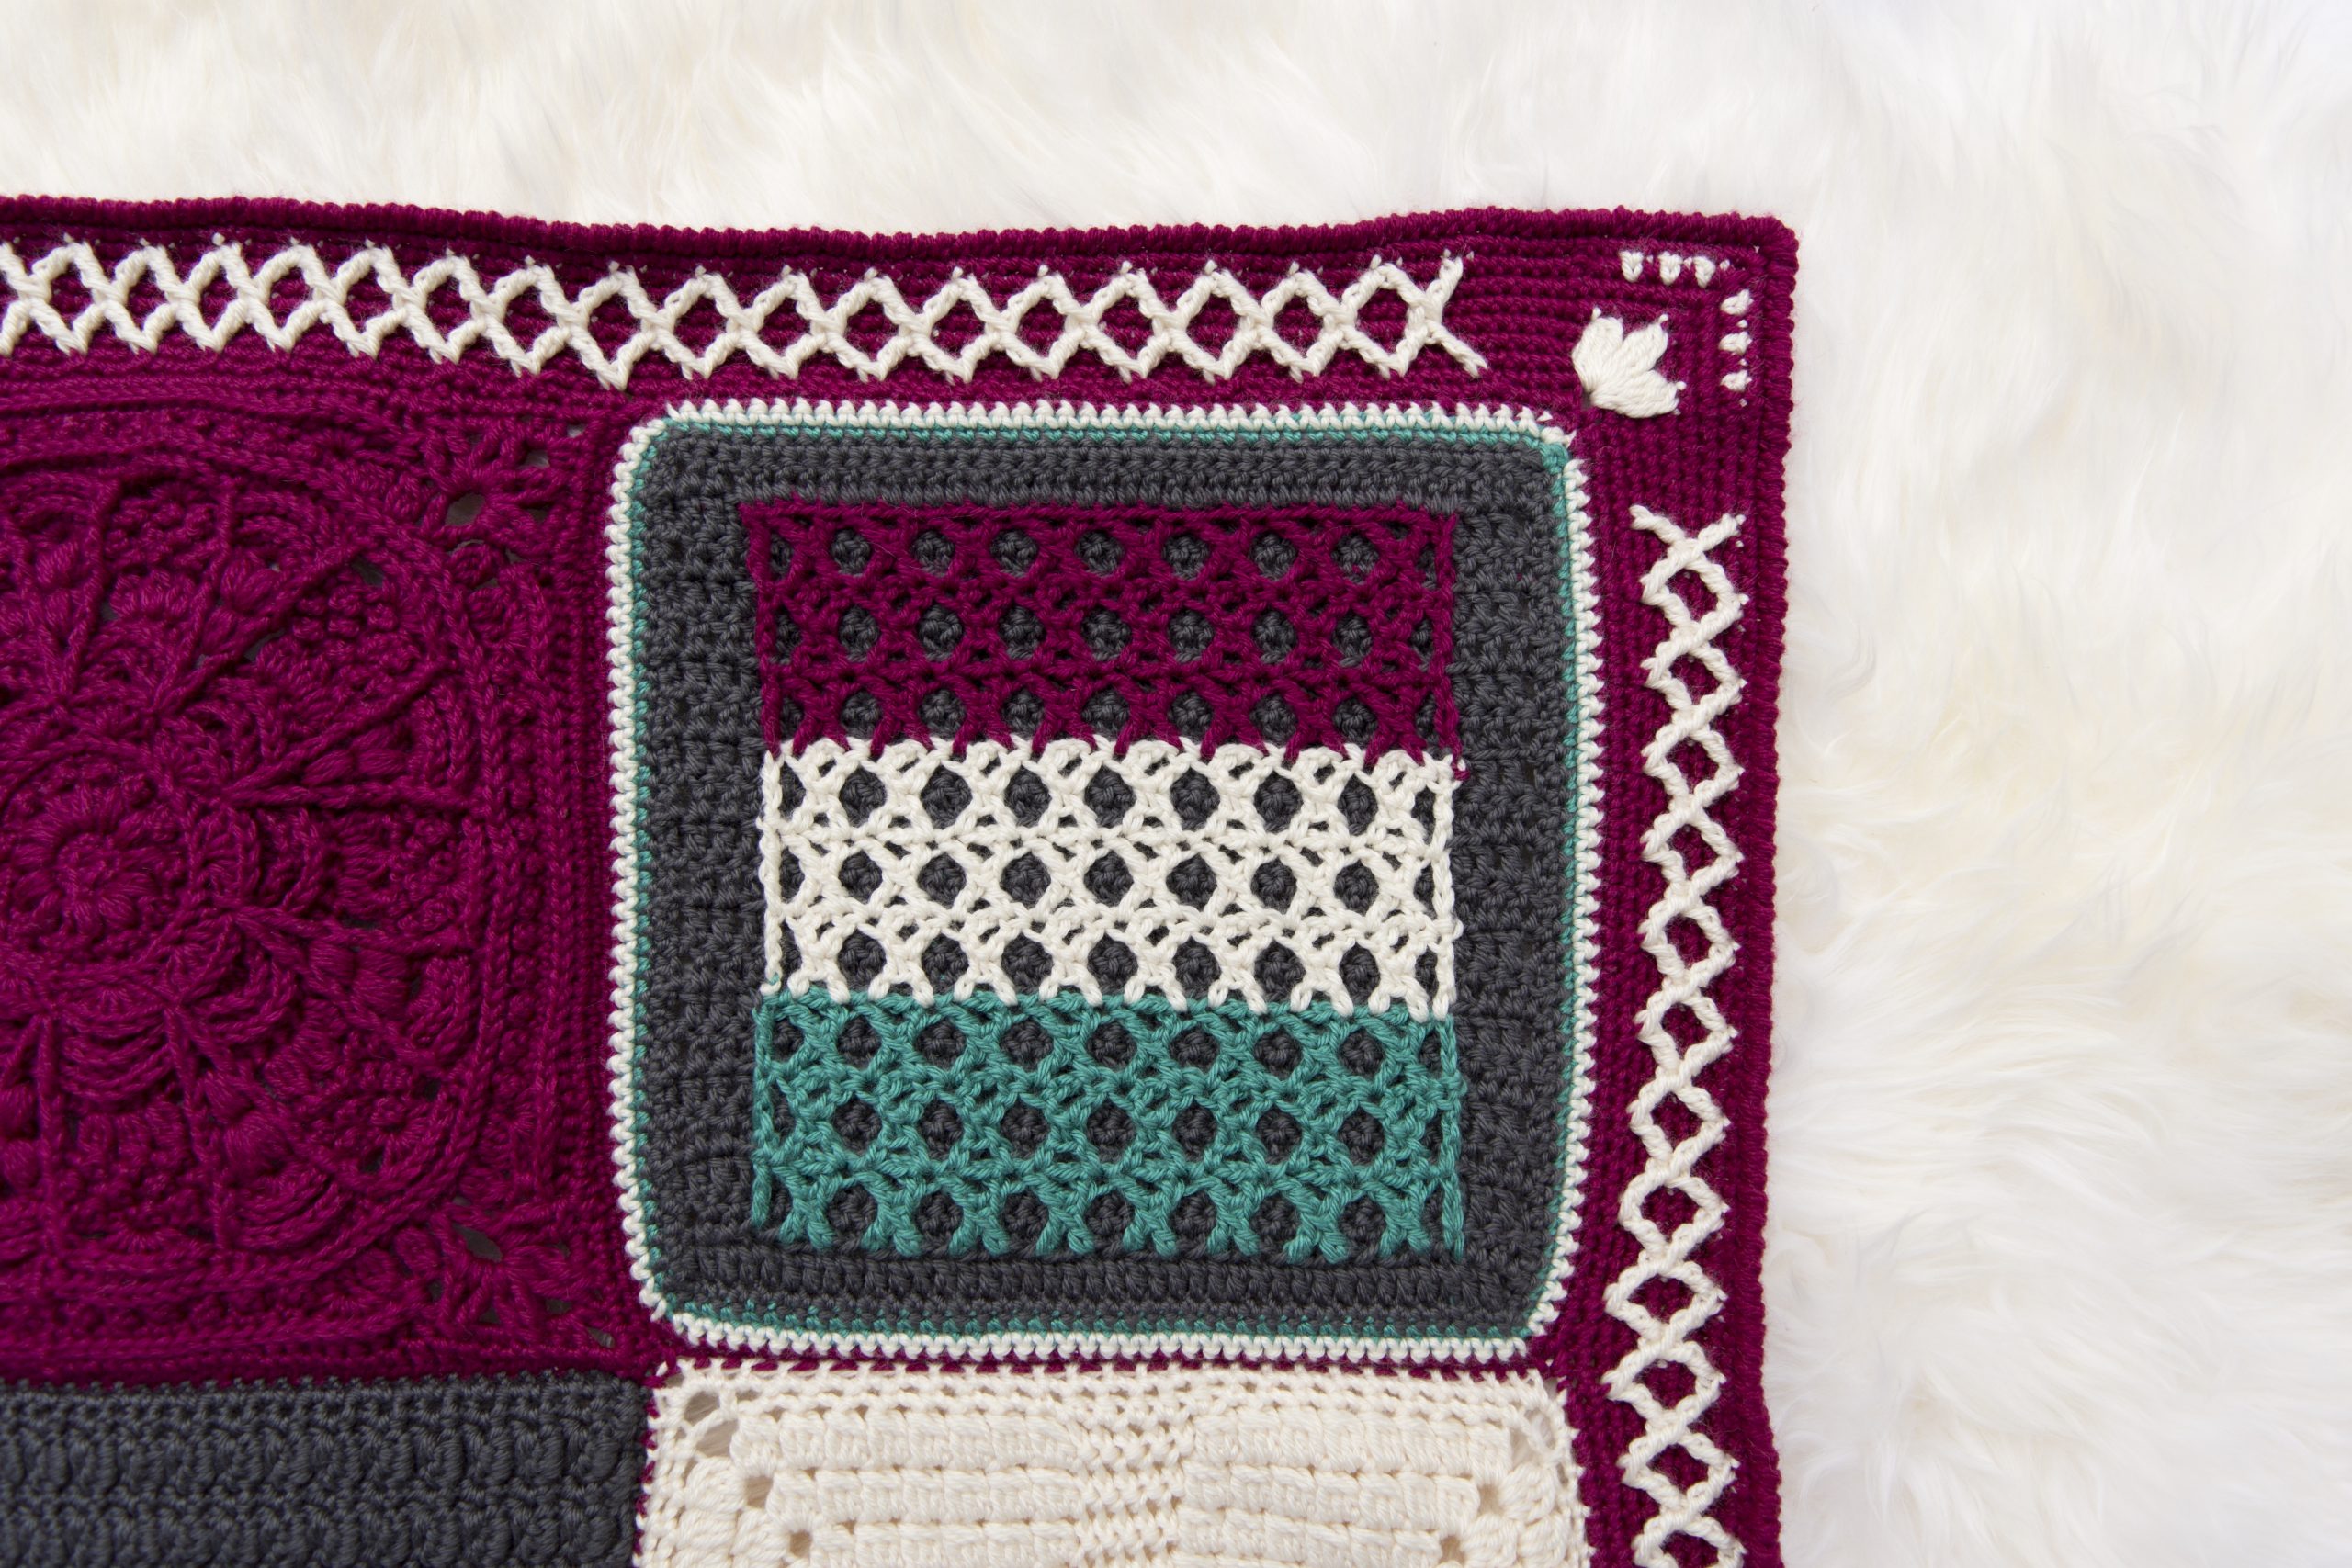 Kisses Square, a free crochet pattern, and part of the Creative Crossings Blanket.